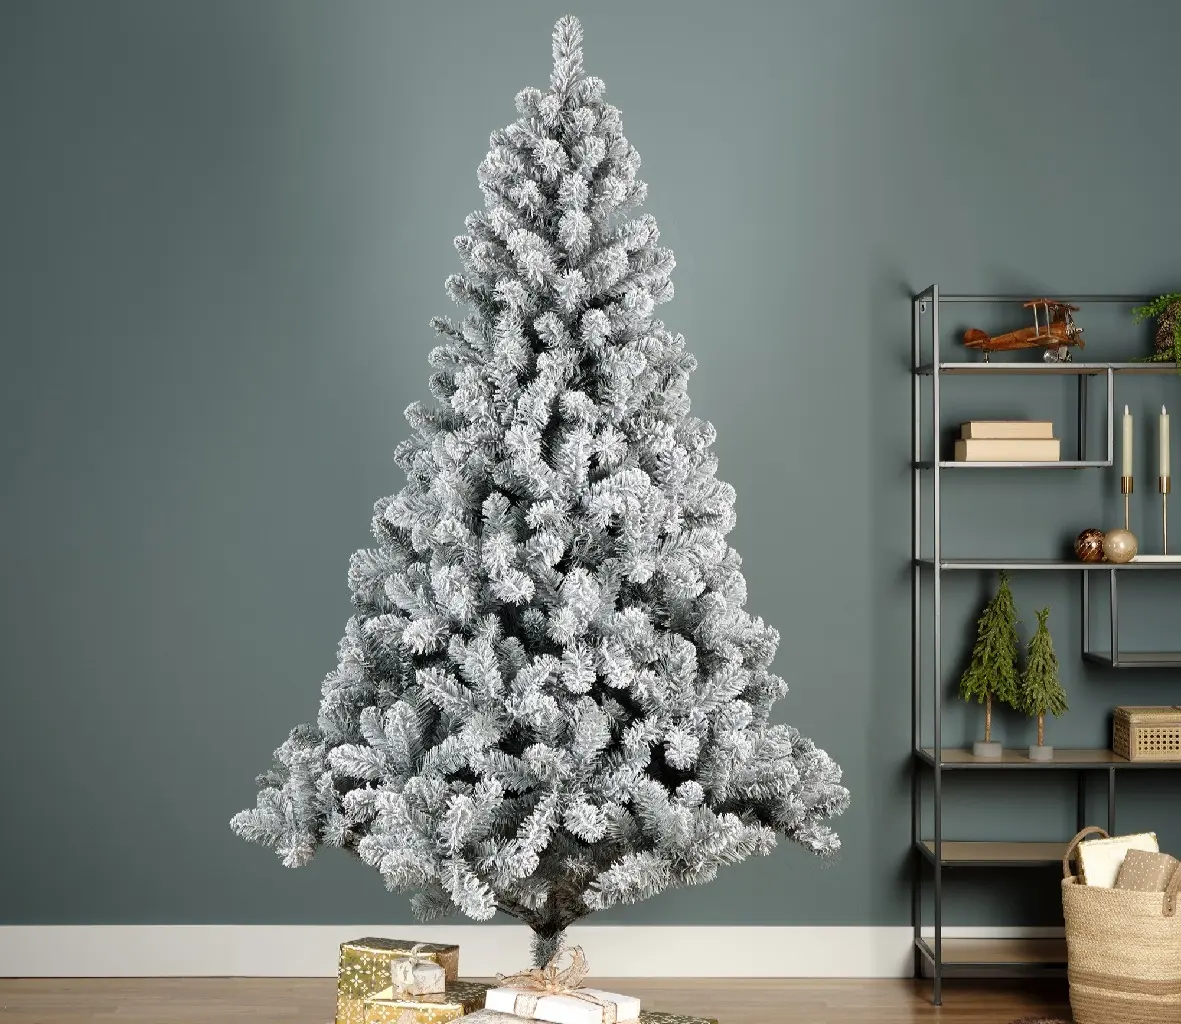 Everlands Frosted Imperial Pine Christmas Tree